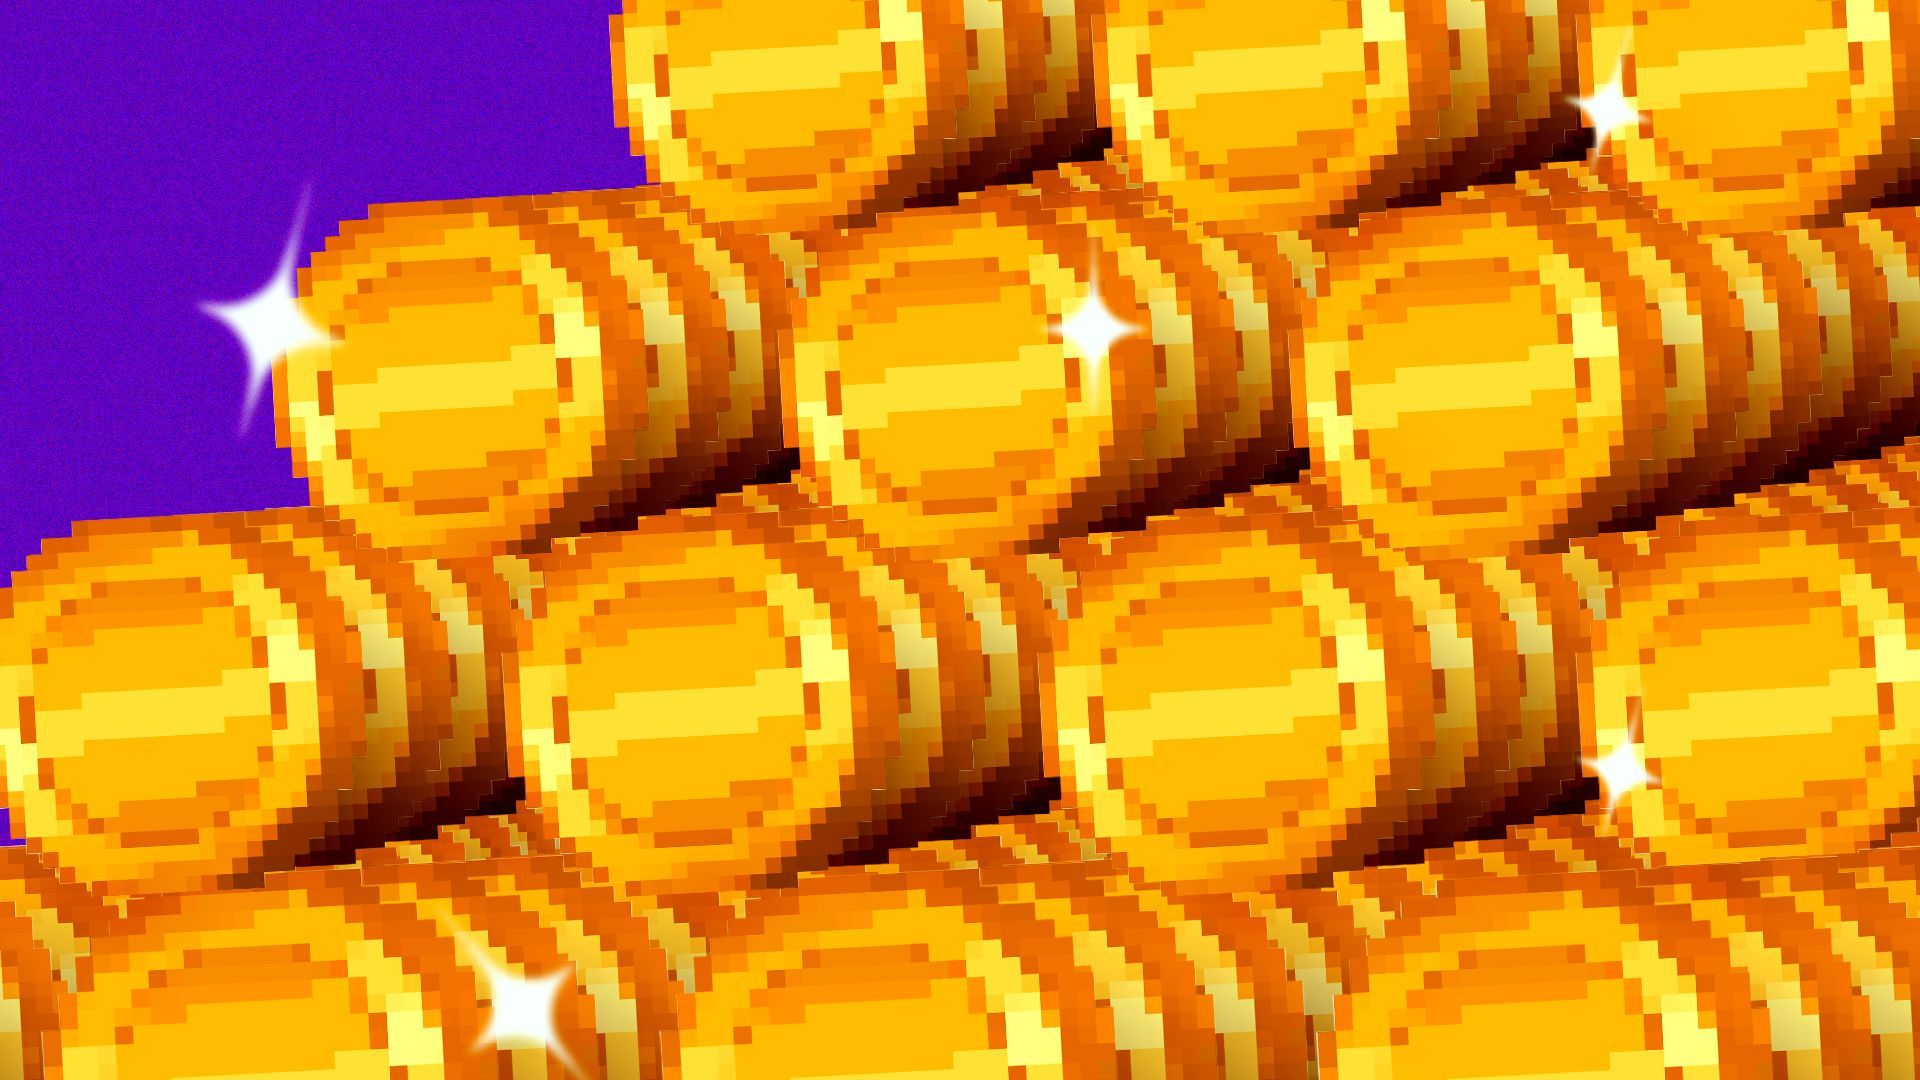 Illustration of many rows of pixelated coins stacked on top of each other 